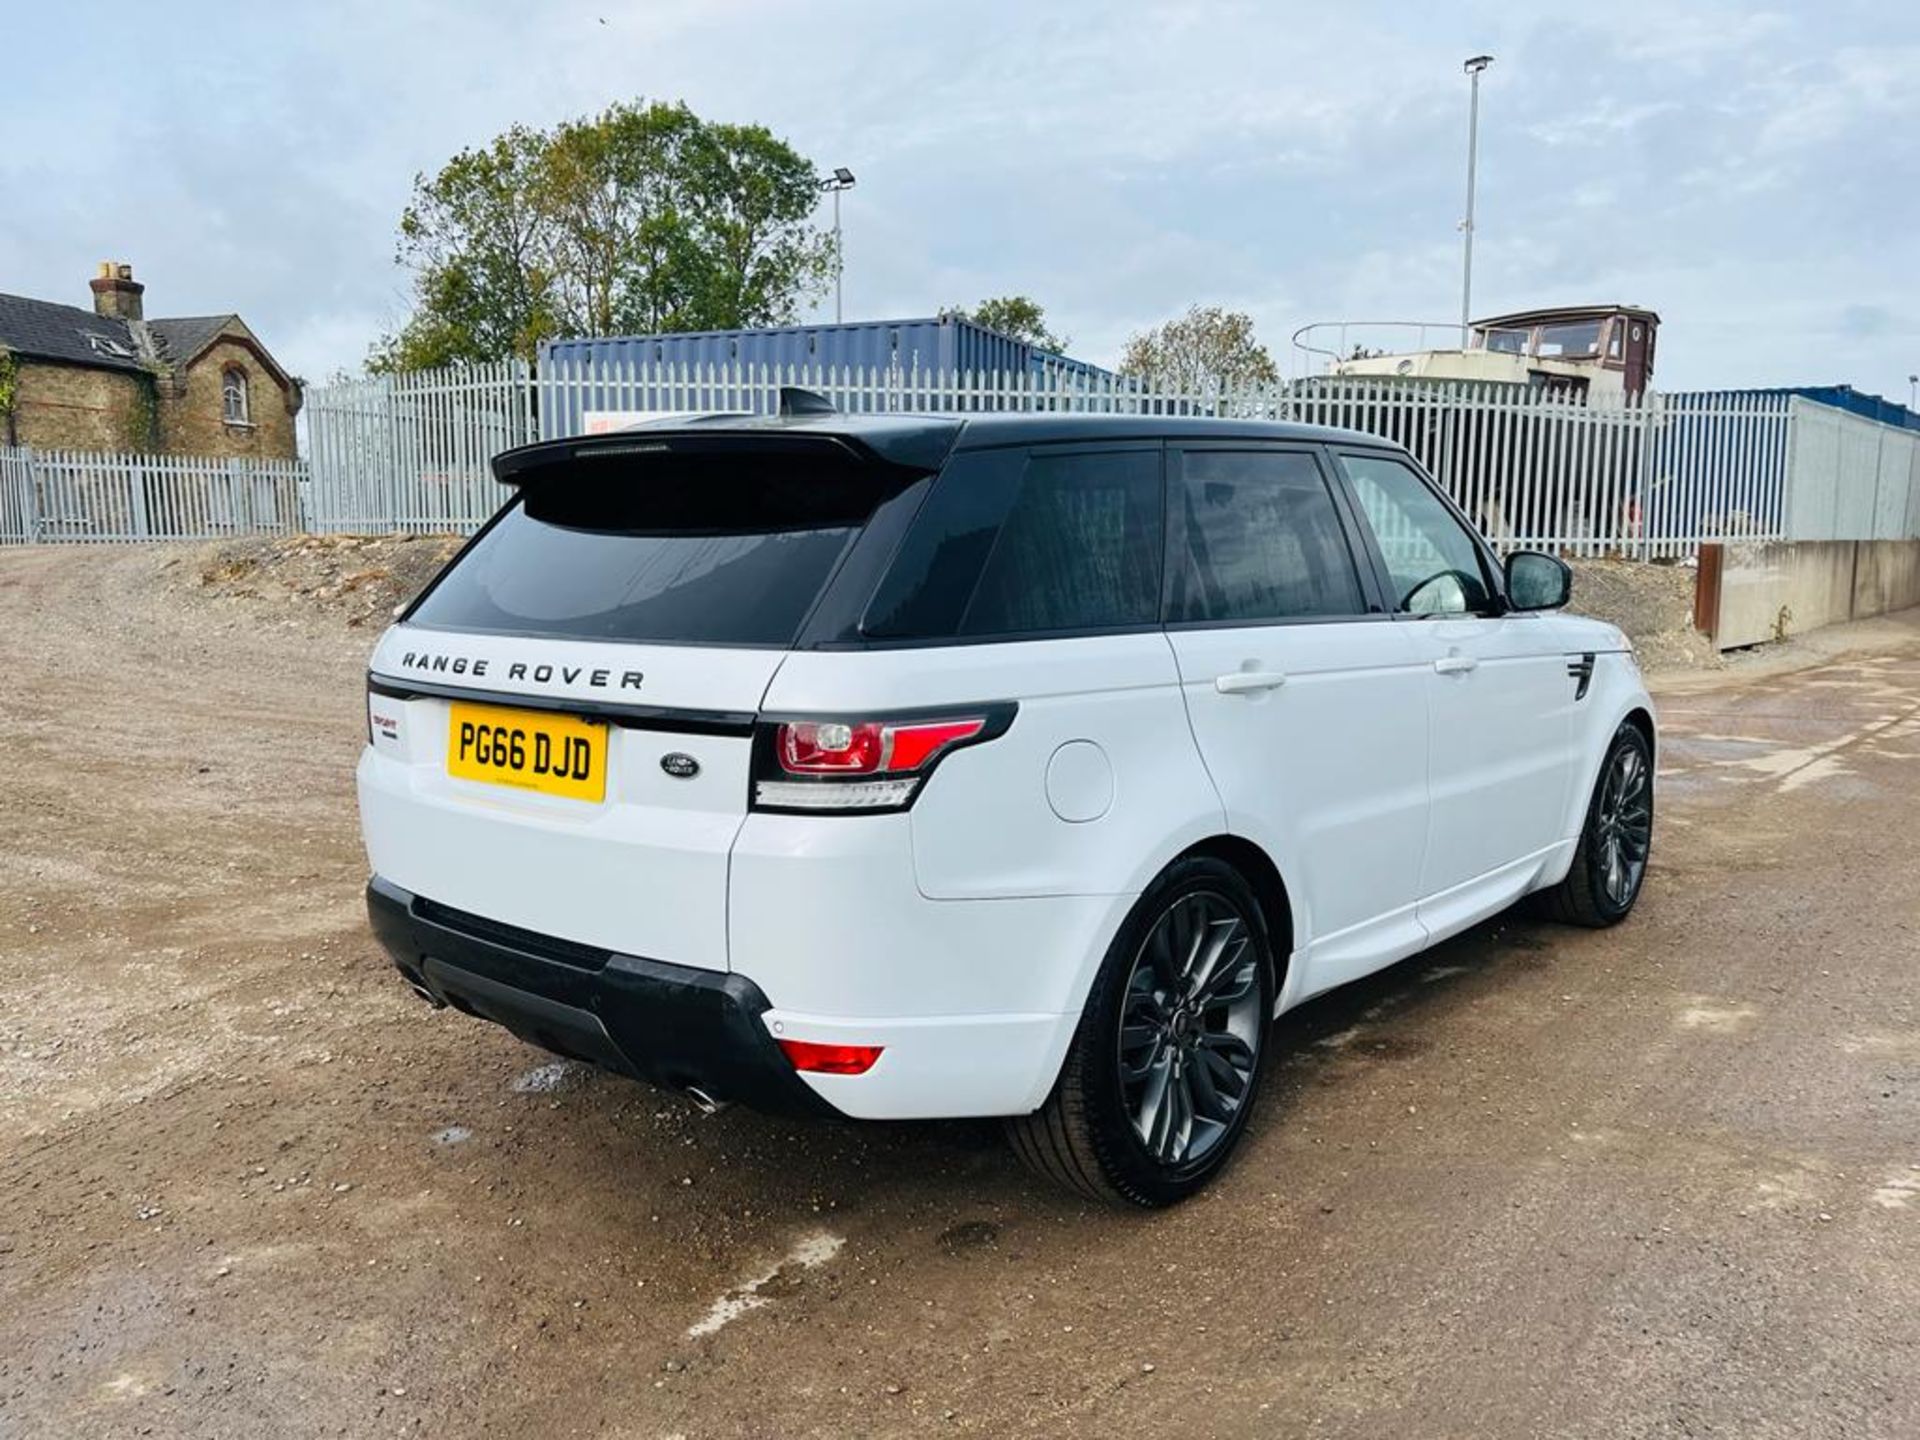 ** ON SALE ** Land Rover Range Rover Sport 3.0 SDV6 306 HSE DYNAMIC 4WD 2017 (66 Reg) - A/C - Image 6 of 32